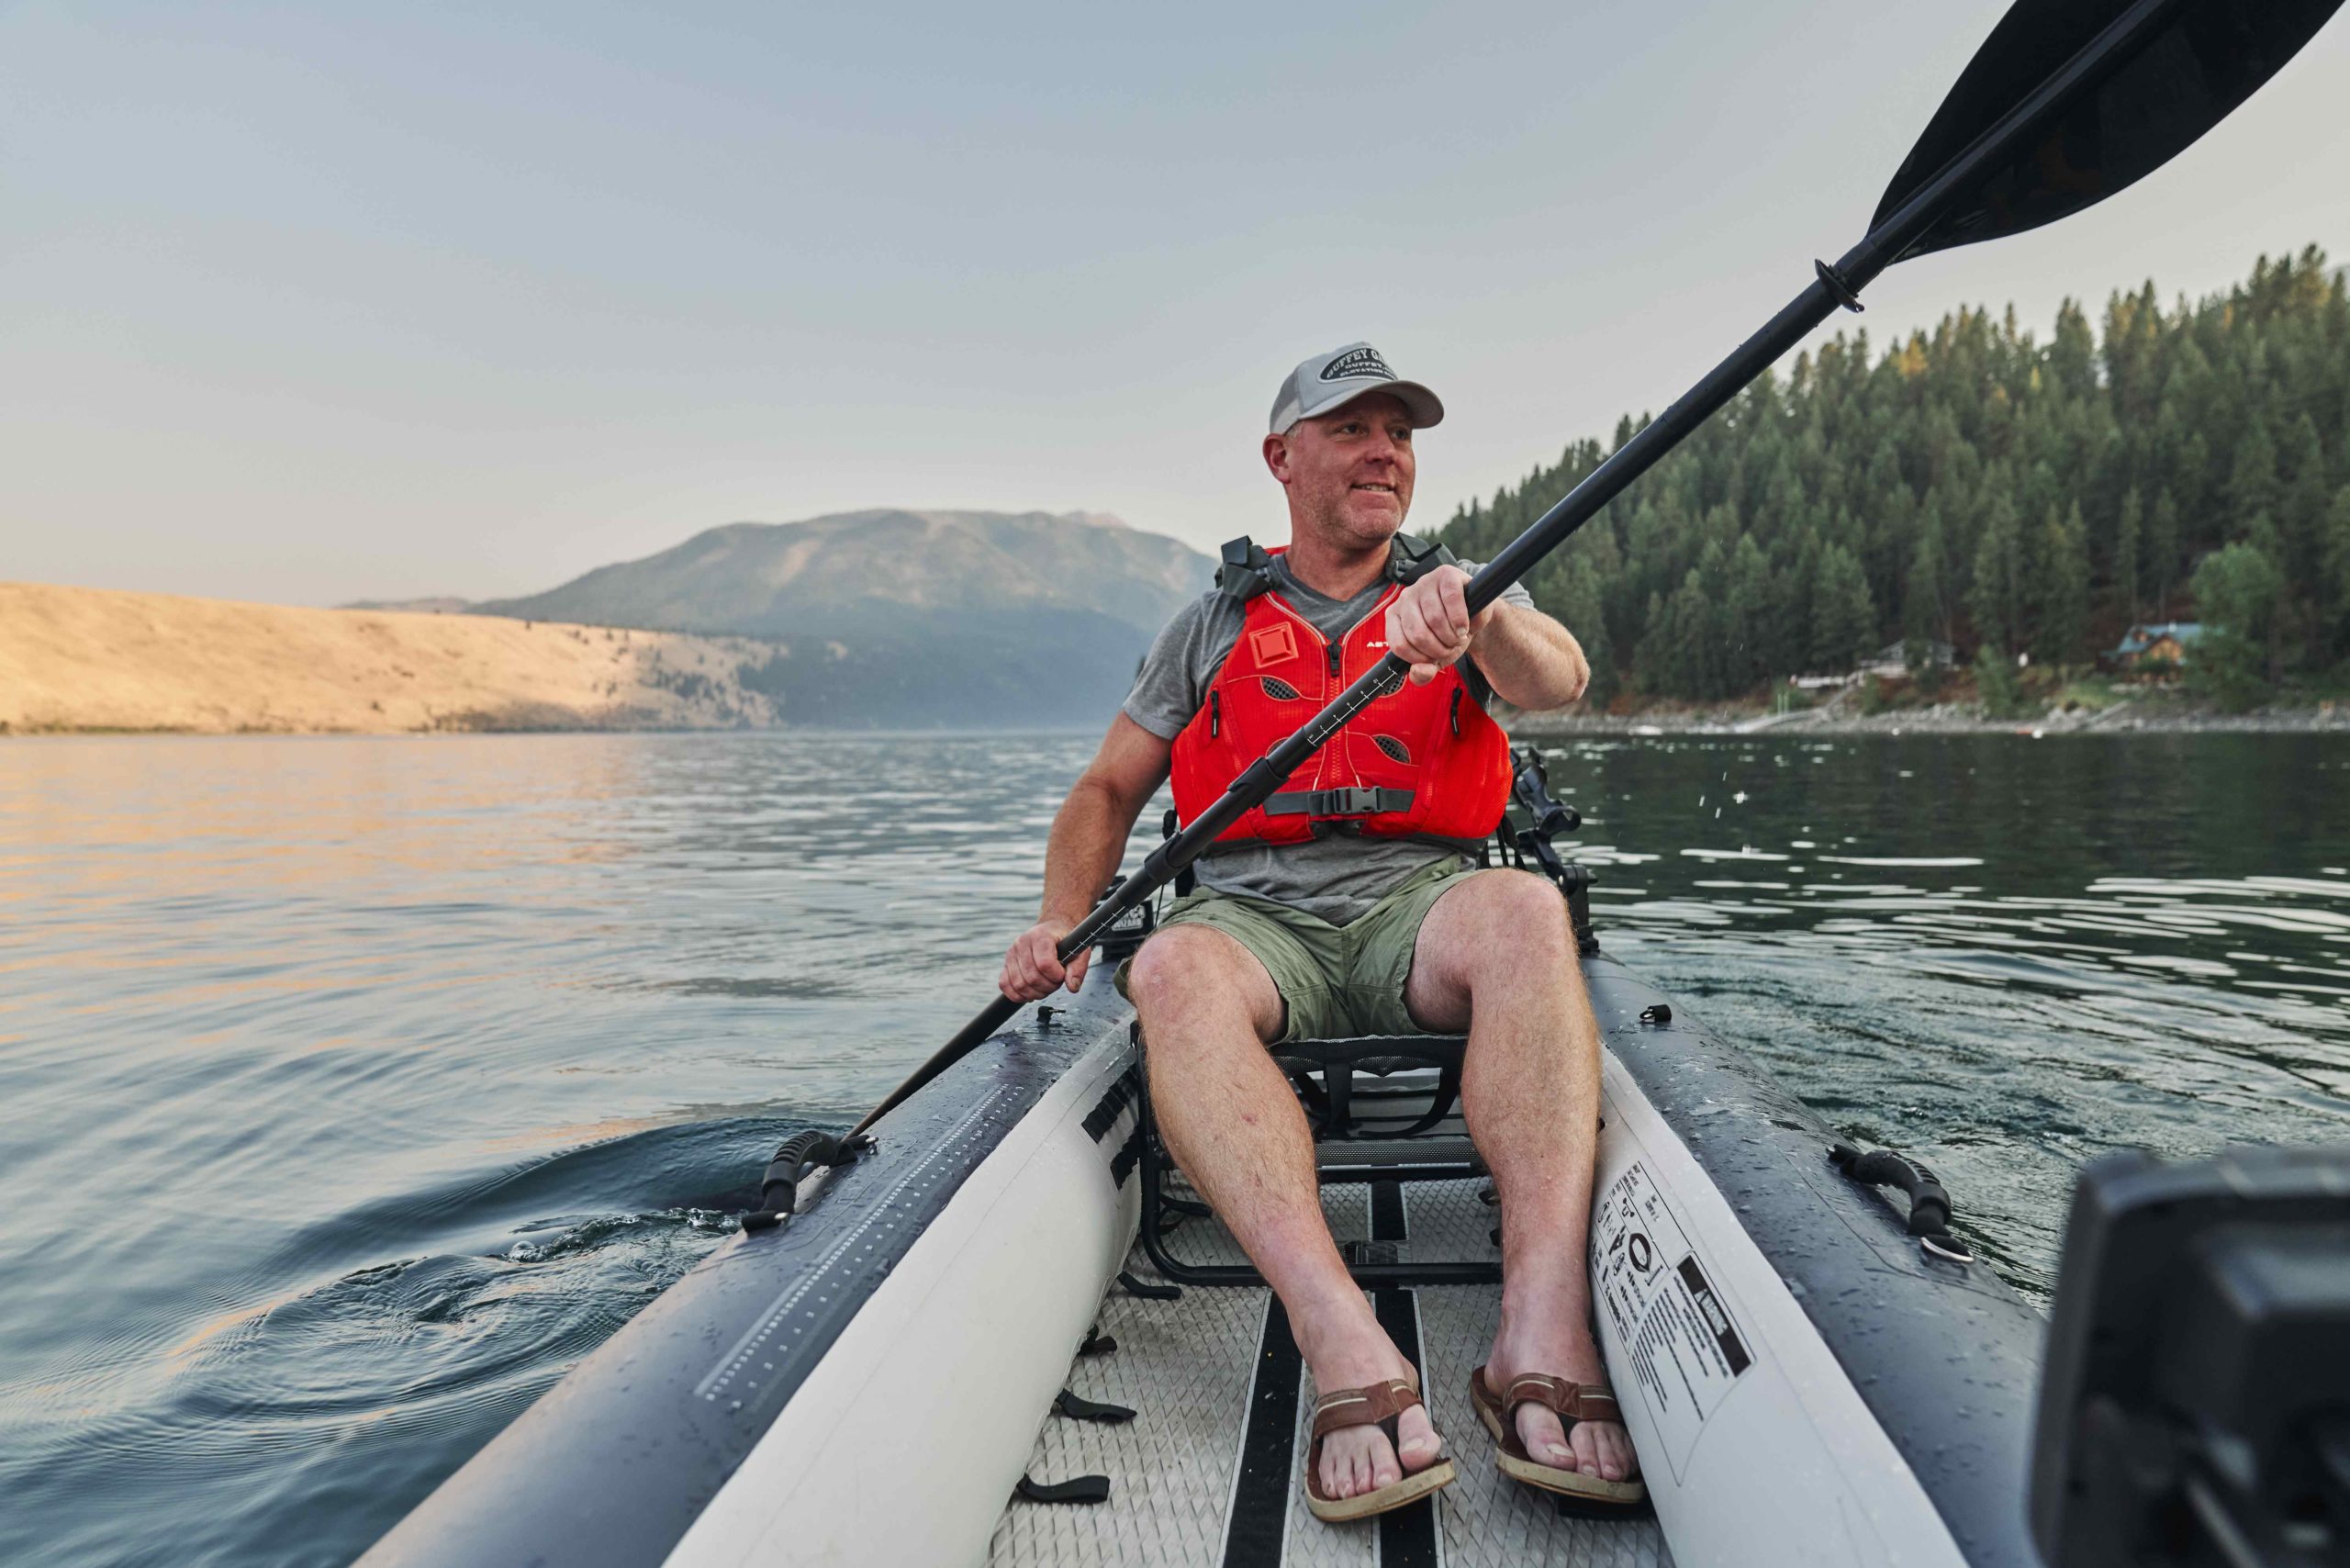 How To Choose a PFD for SUP & Kayak